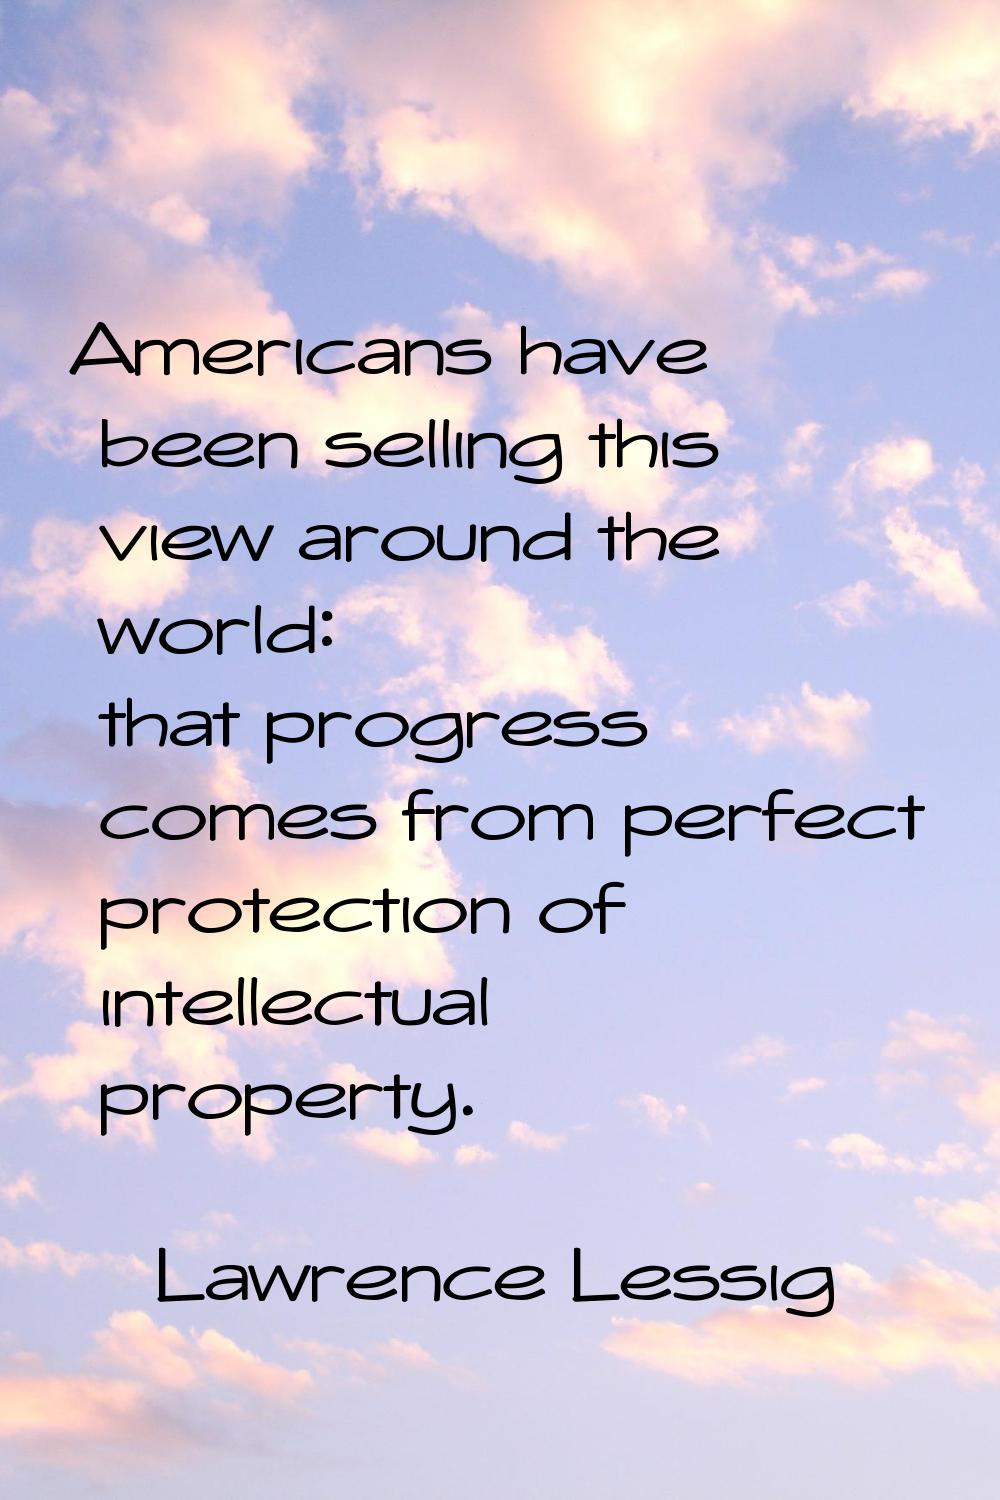 Americans have been selling this view around the world: that progress comes from perfect protection